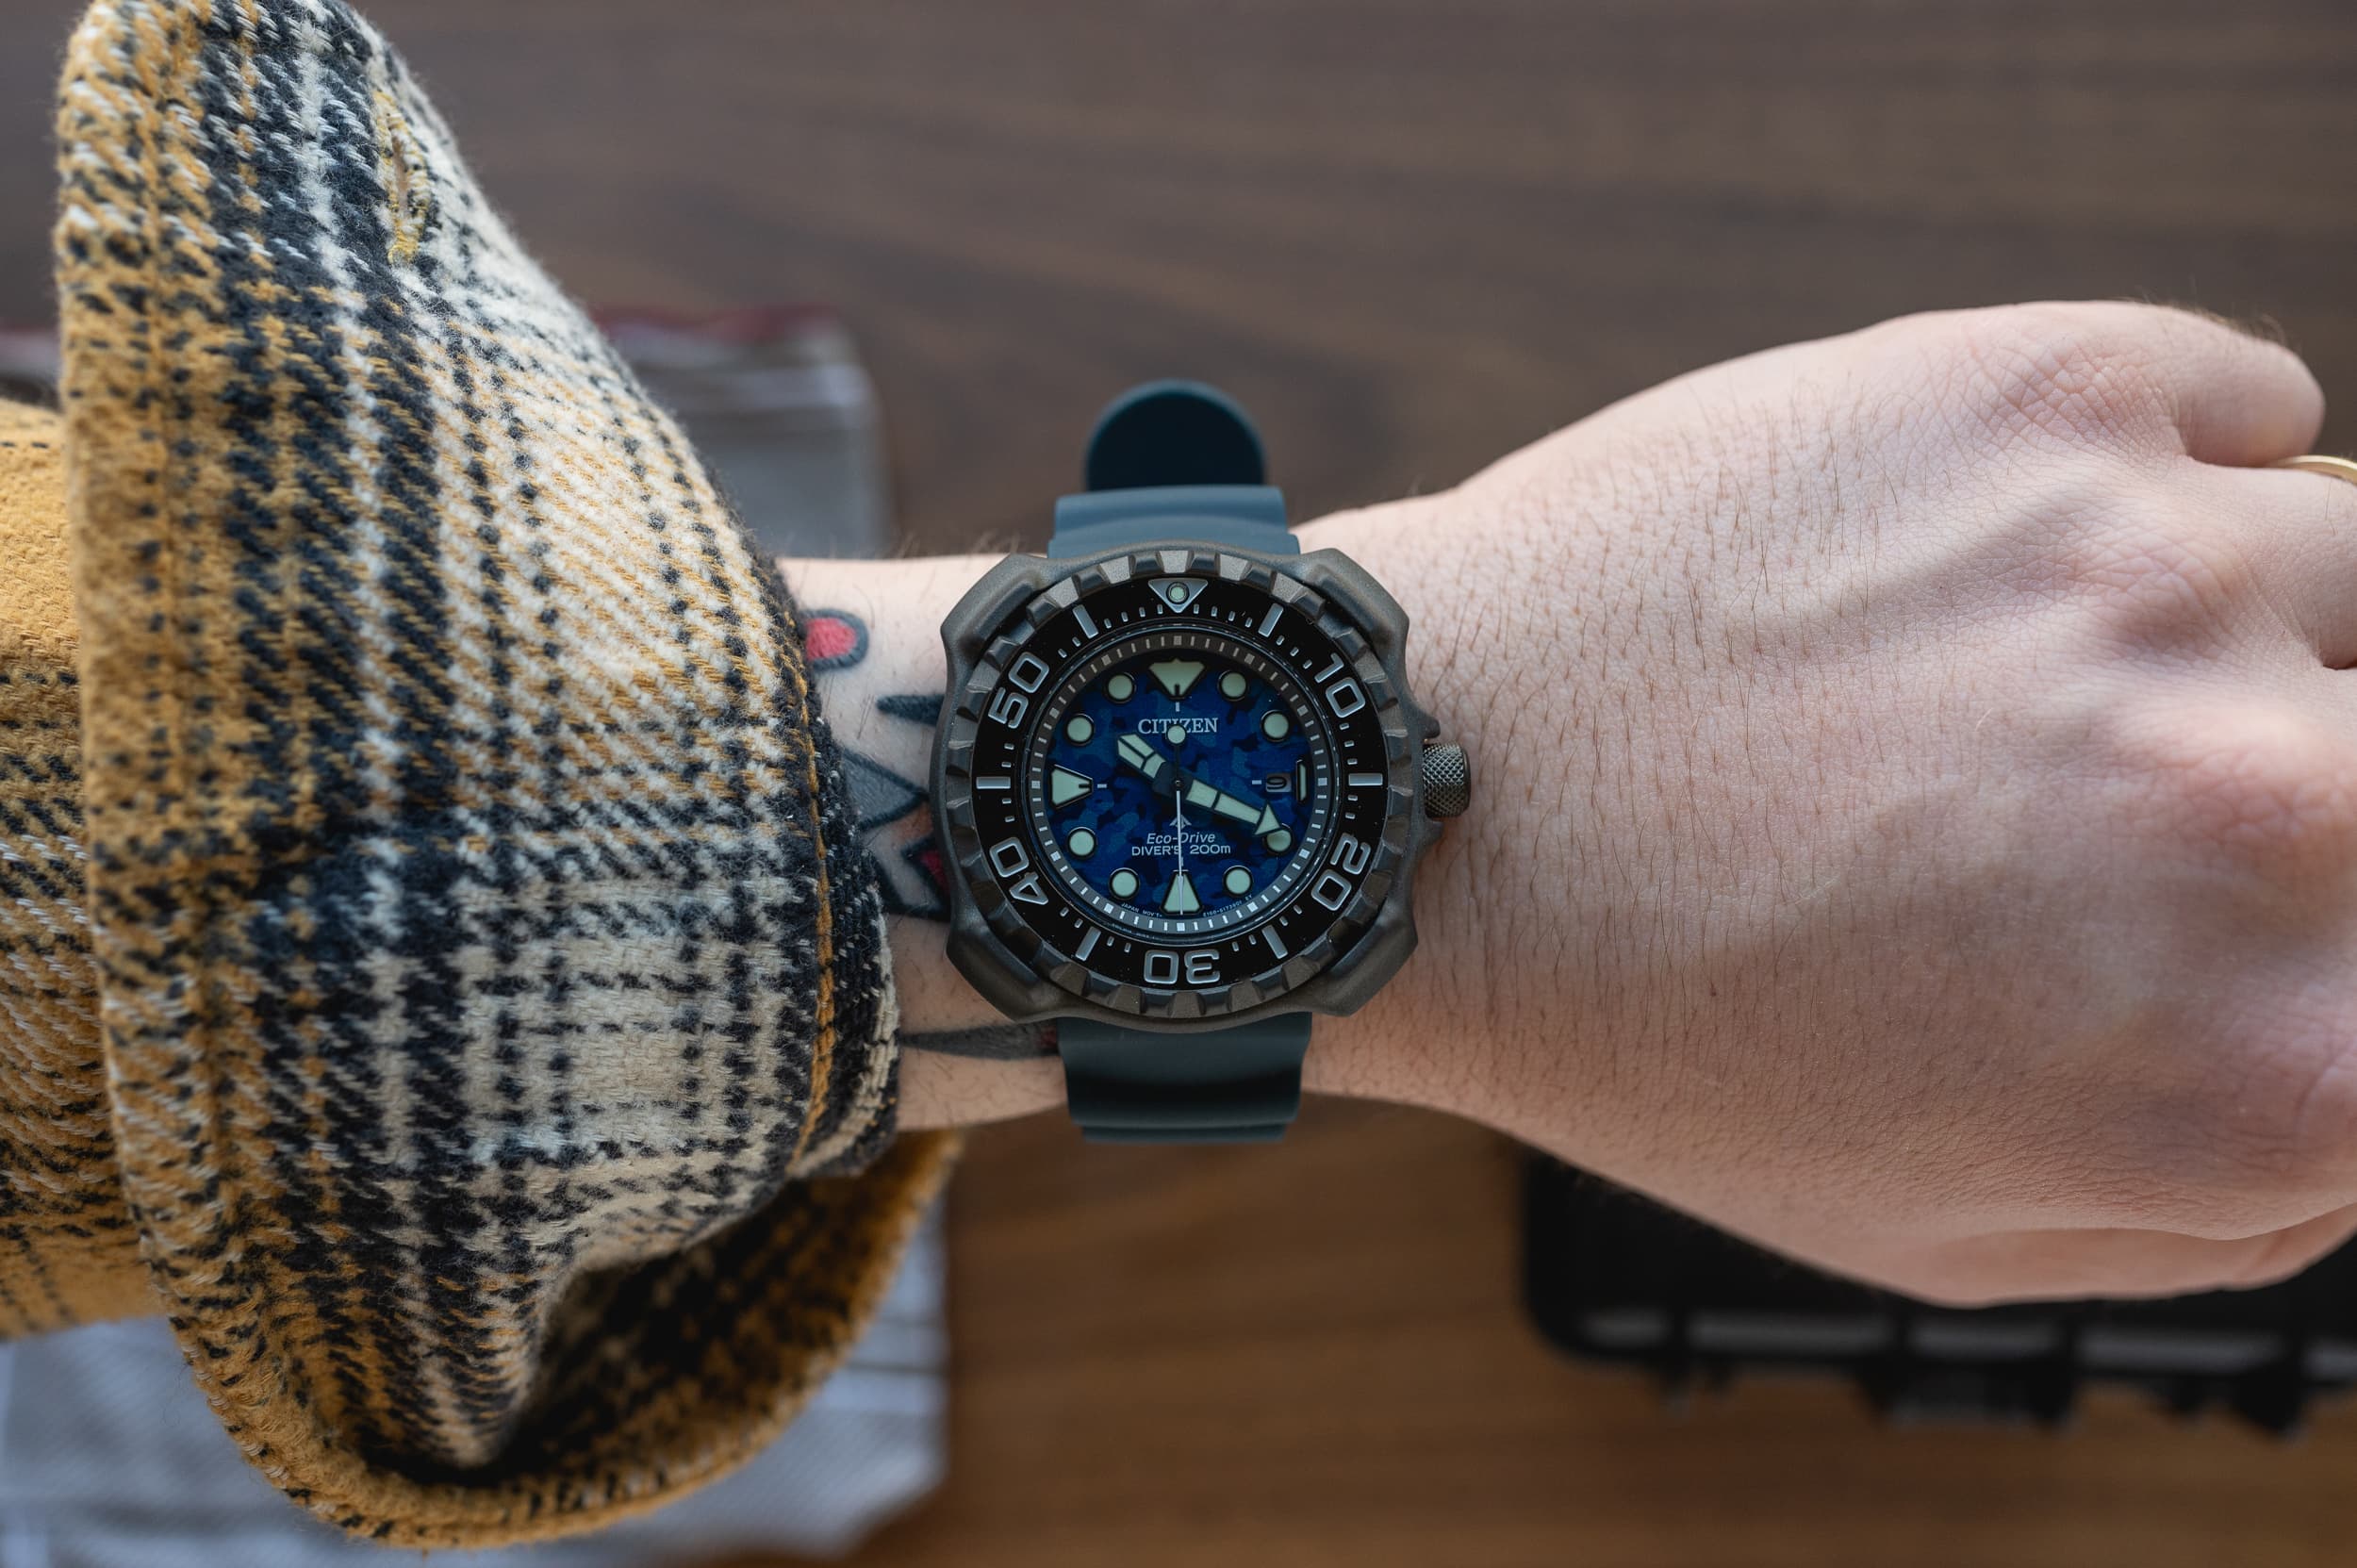 Review: The Assertive Yet Approachable Citizen Promaster Diver